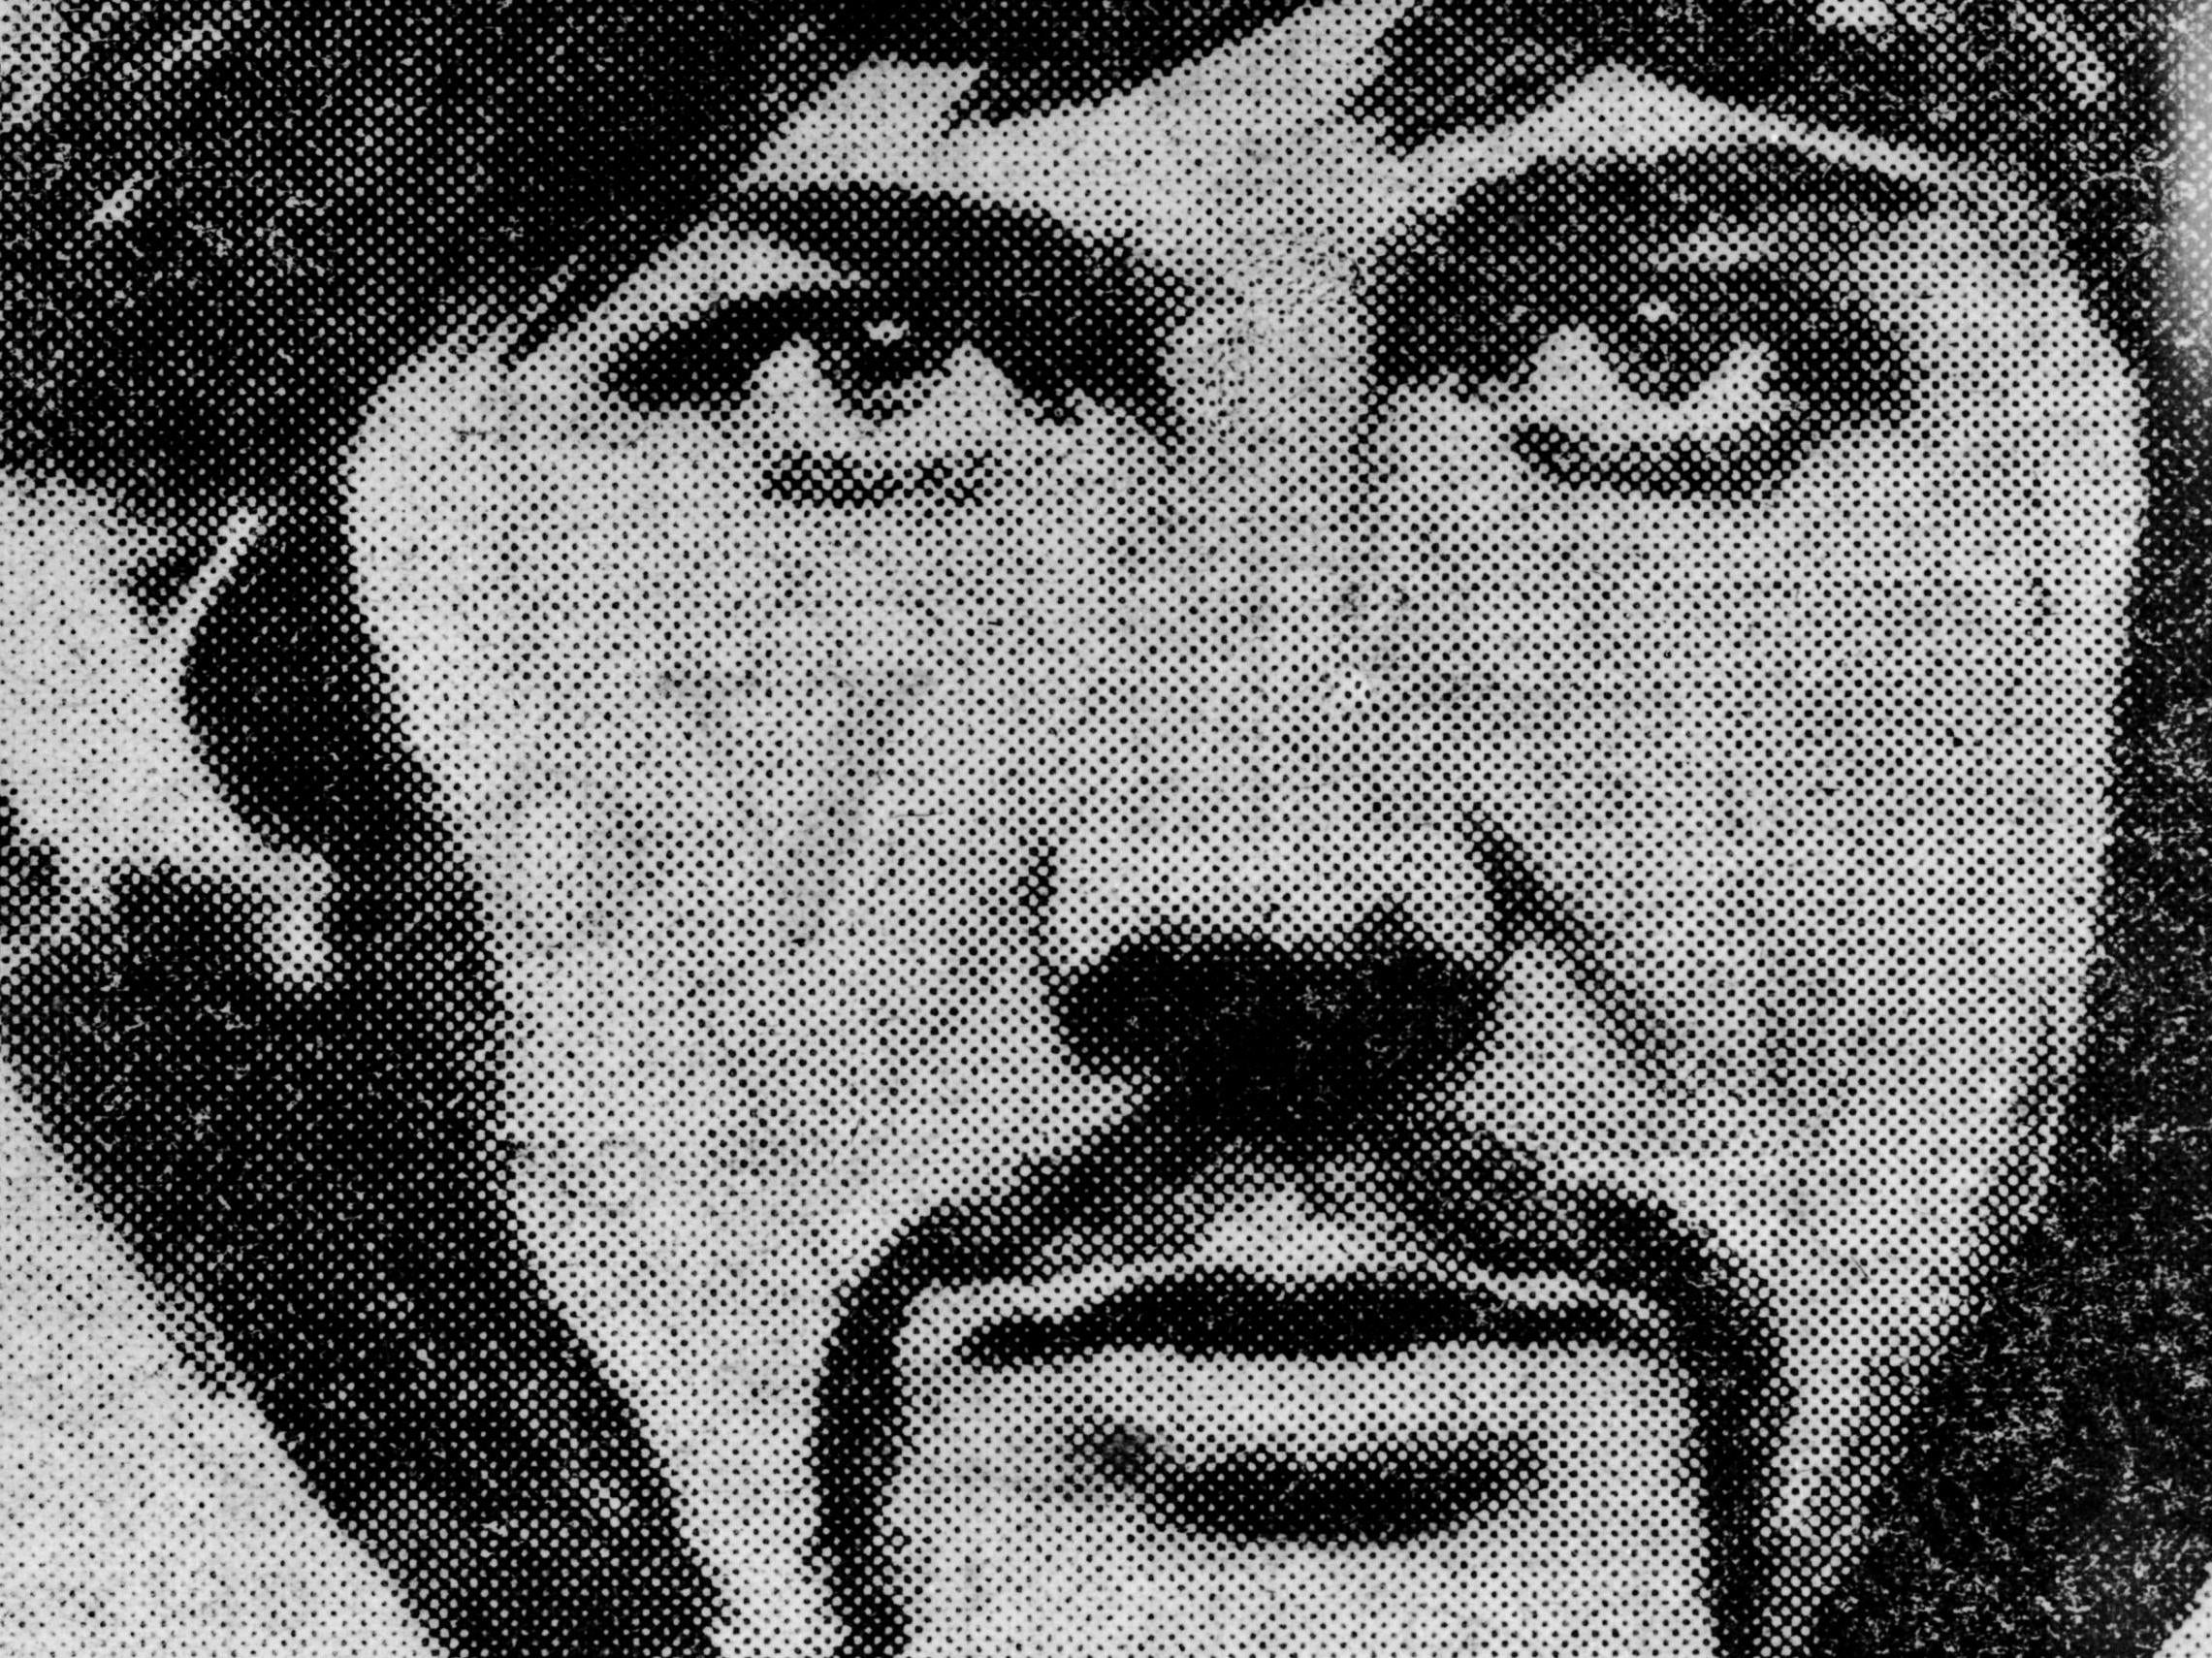 A photofit issued by the police of Peter Sutcliffe, aka 'The Yorkshire Ripper'